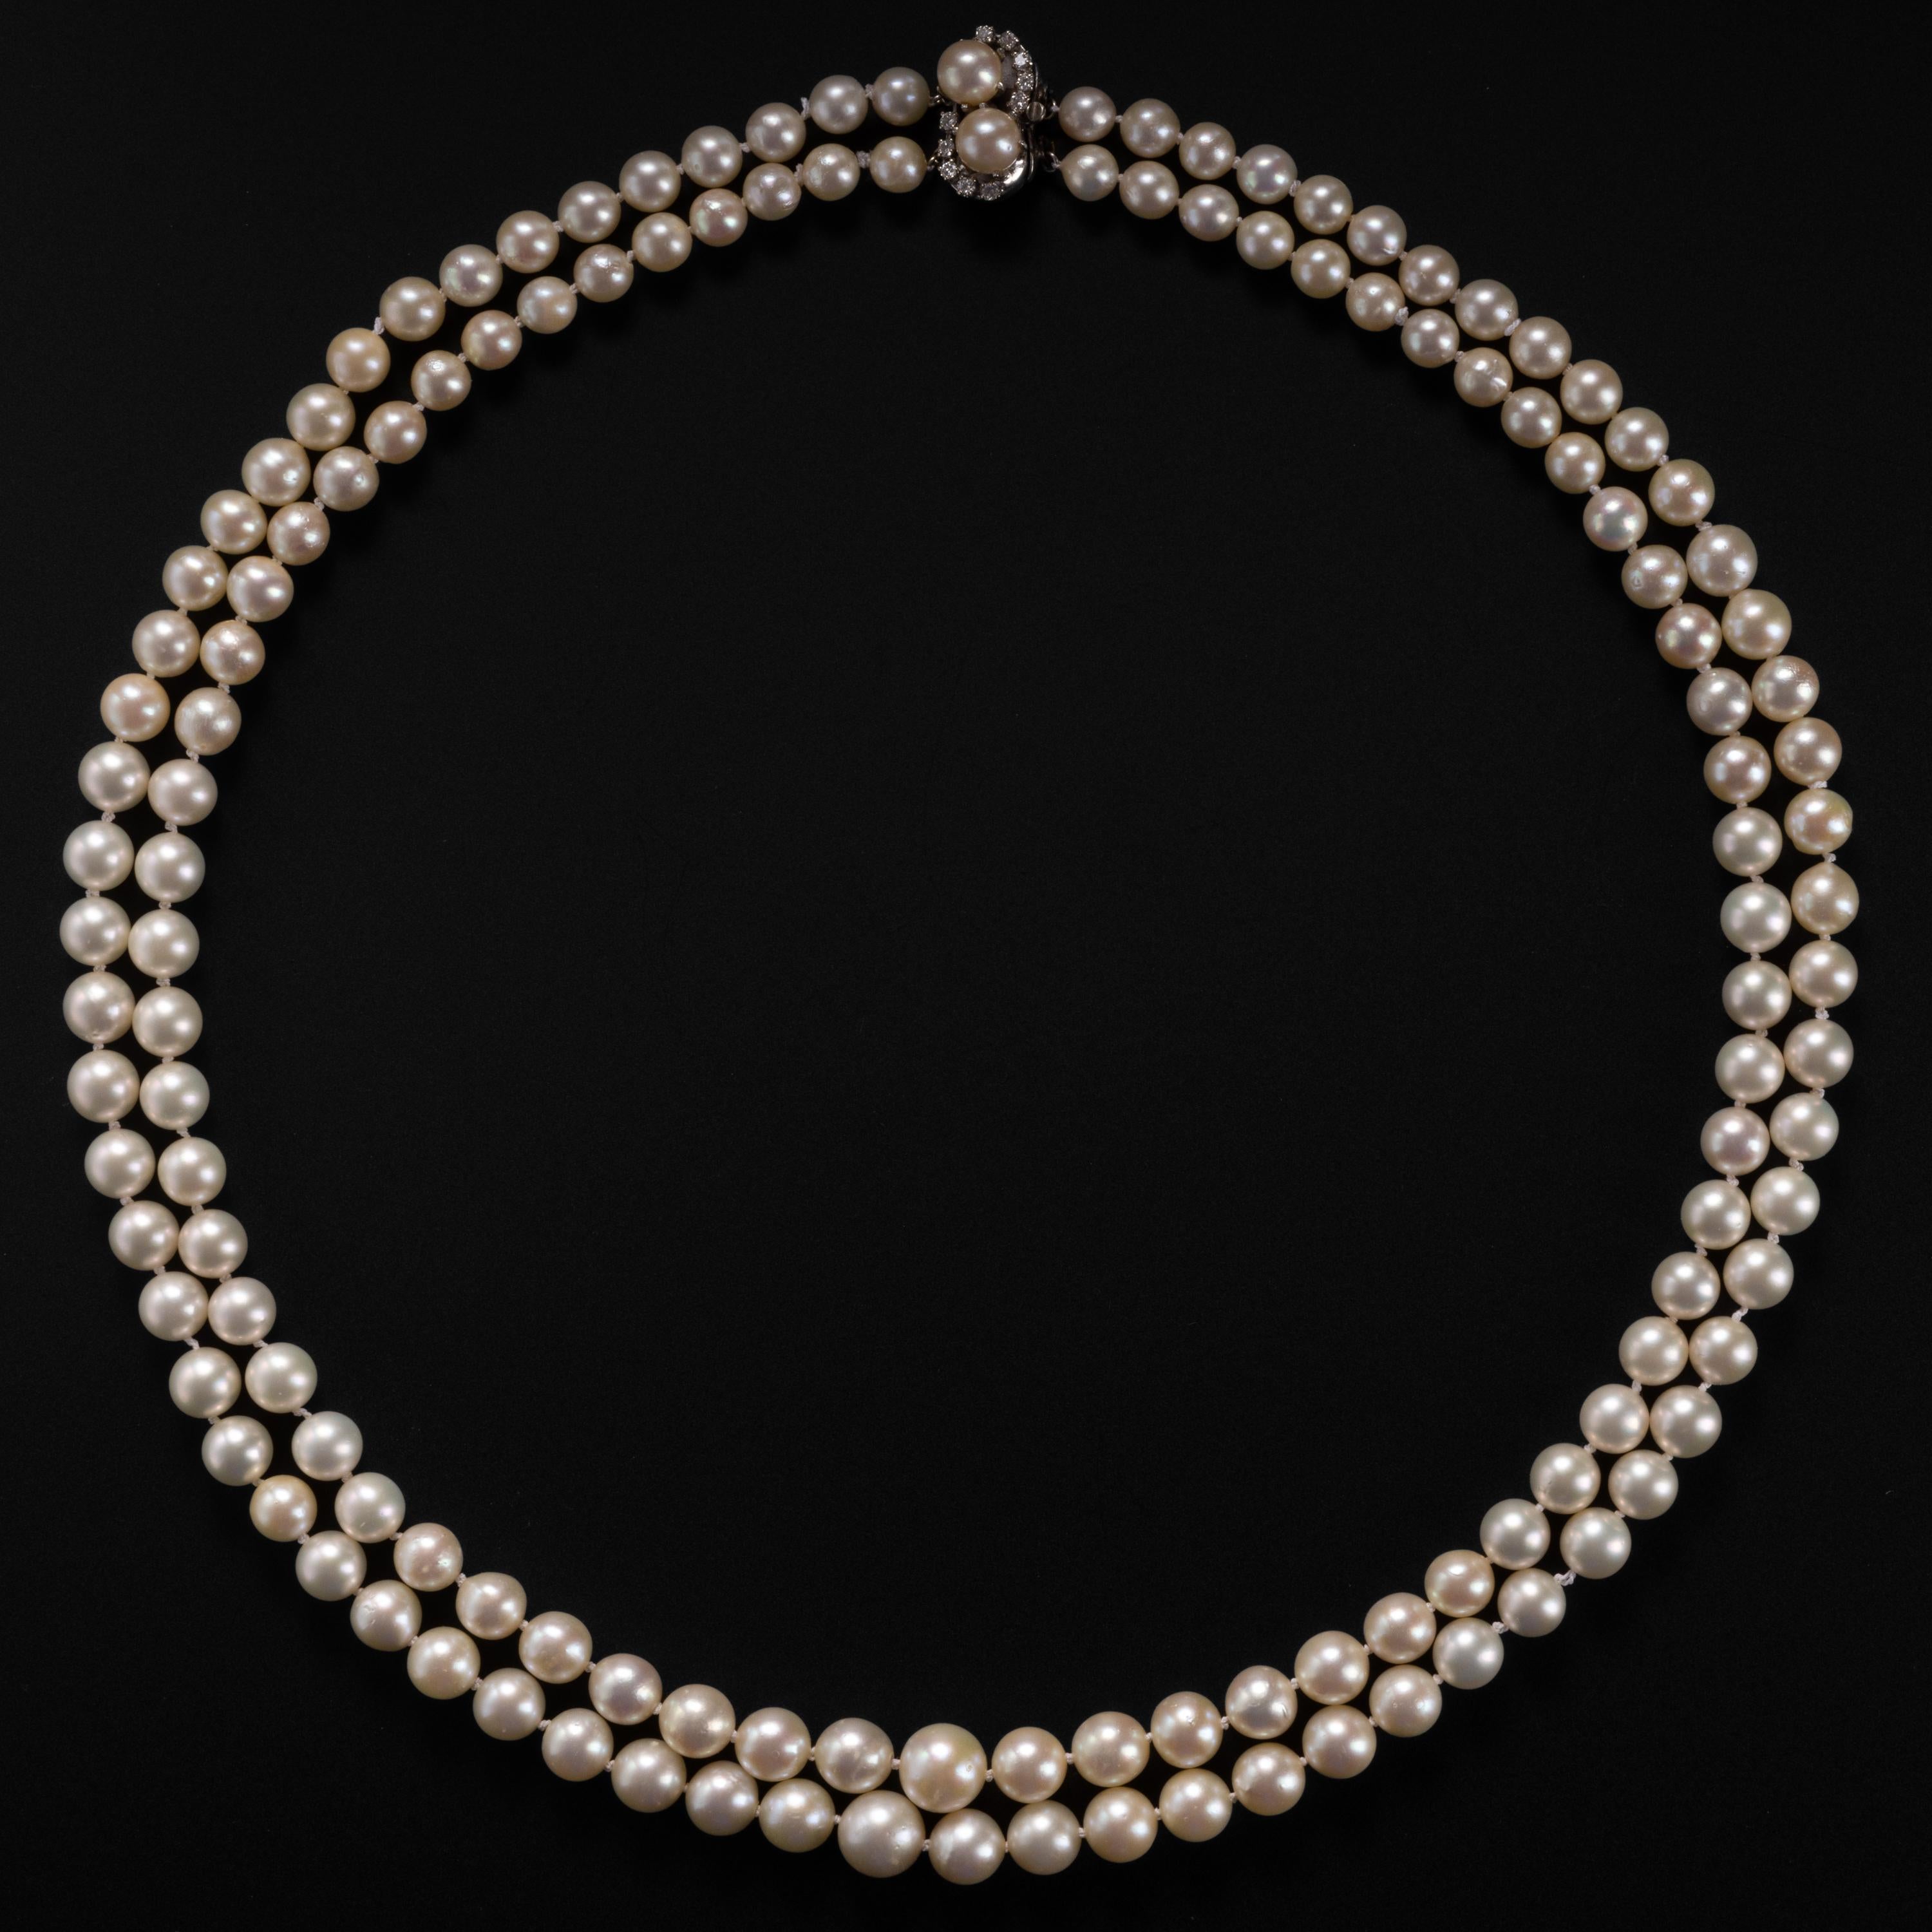 This luxuriously long and fine graduated strand of Midcentury (circa 1950s) cultured Akoya pearls features large and luminous pearls in a length rarely encountered. A pristine necklace from the era when the finest cultured Akoya pearls were created.